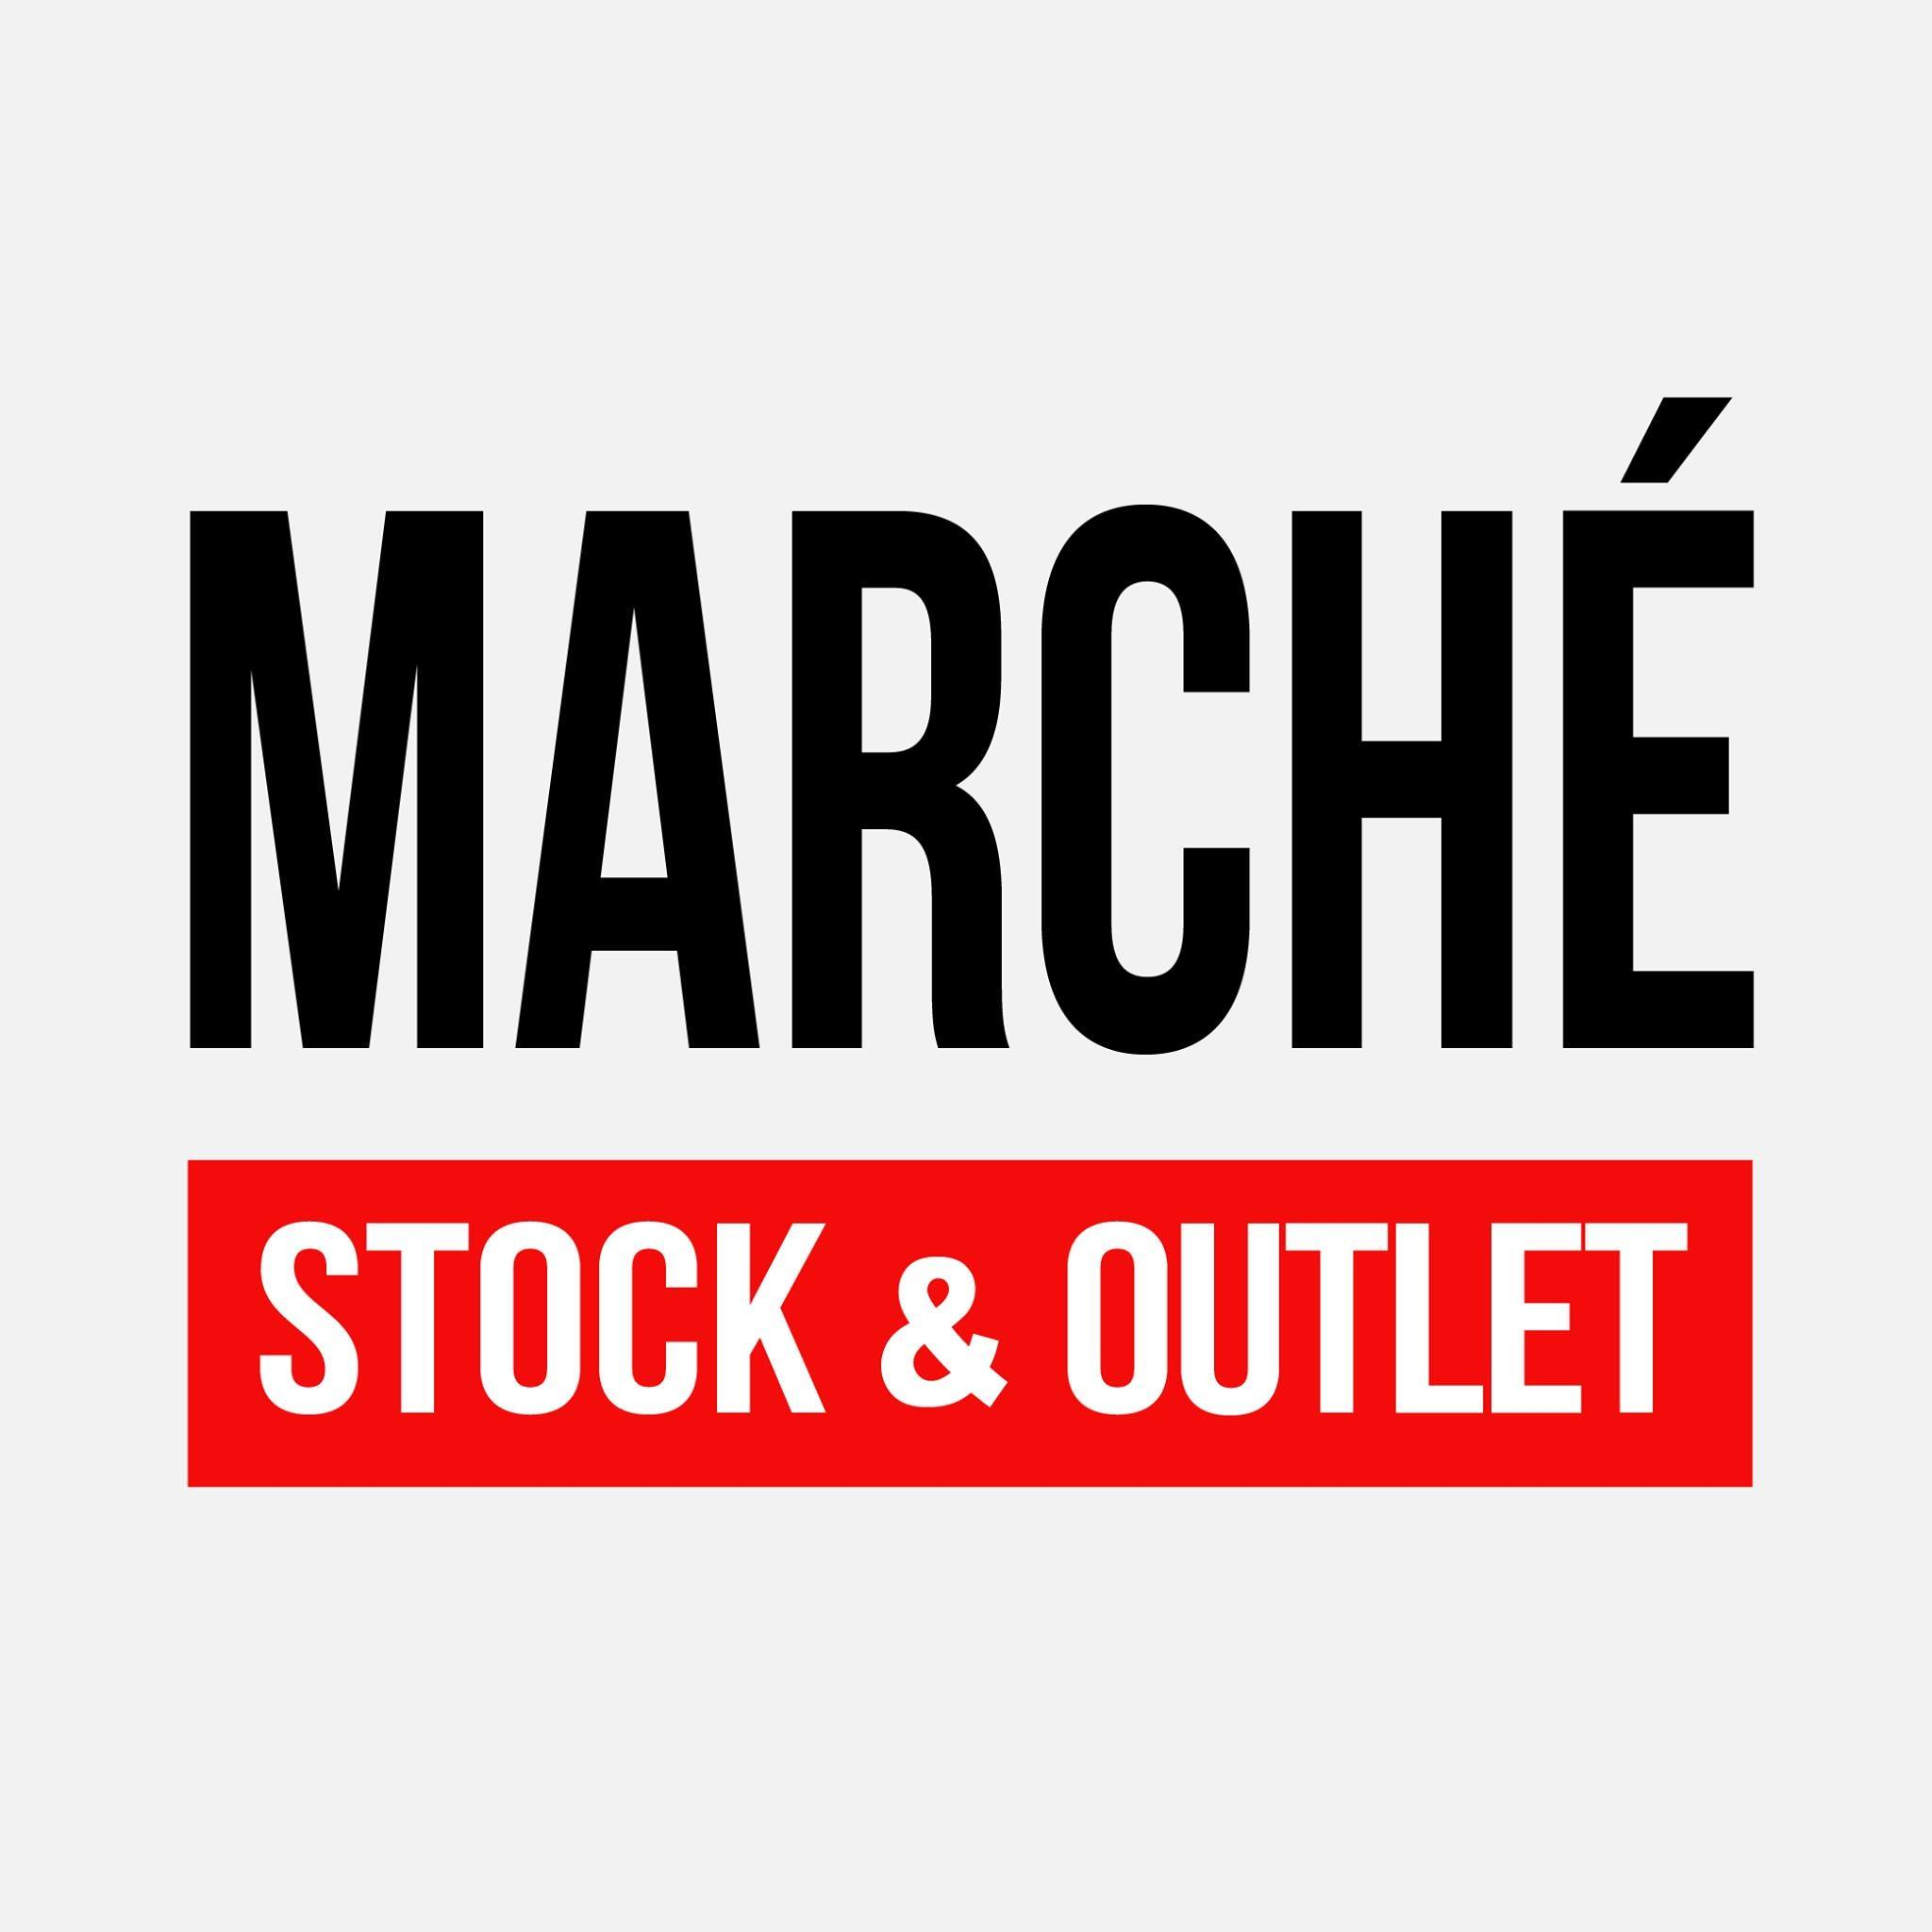  Marché Stock & Outlet